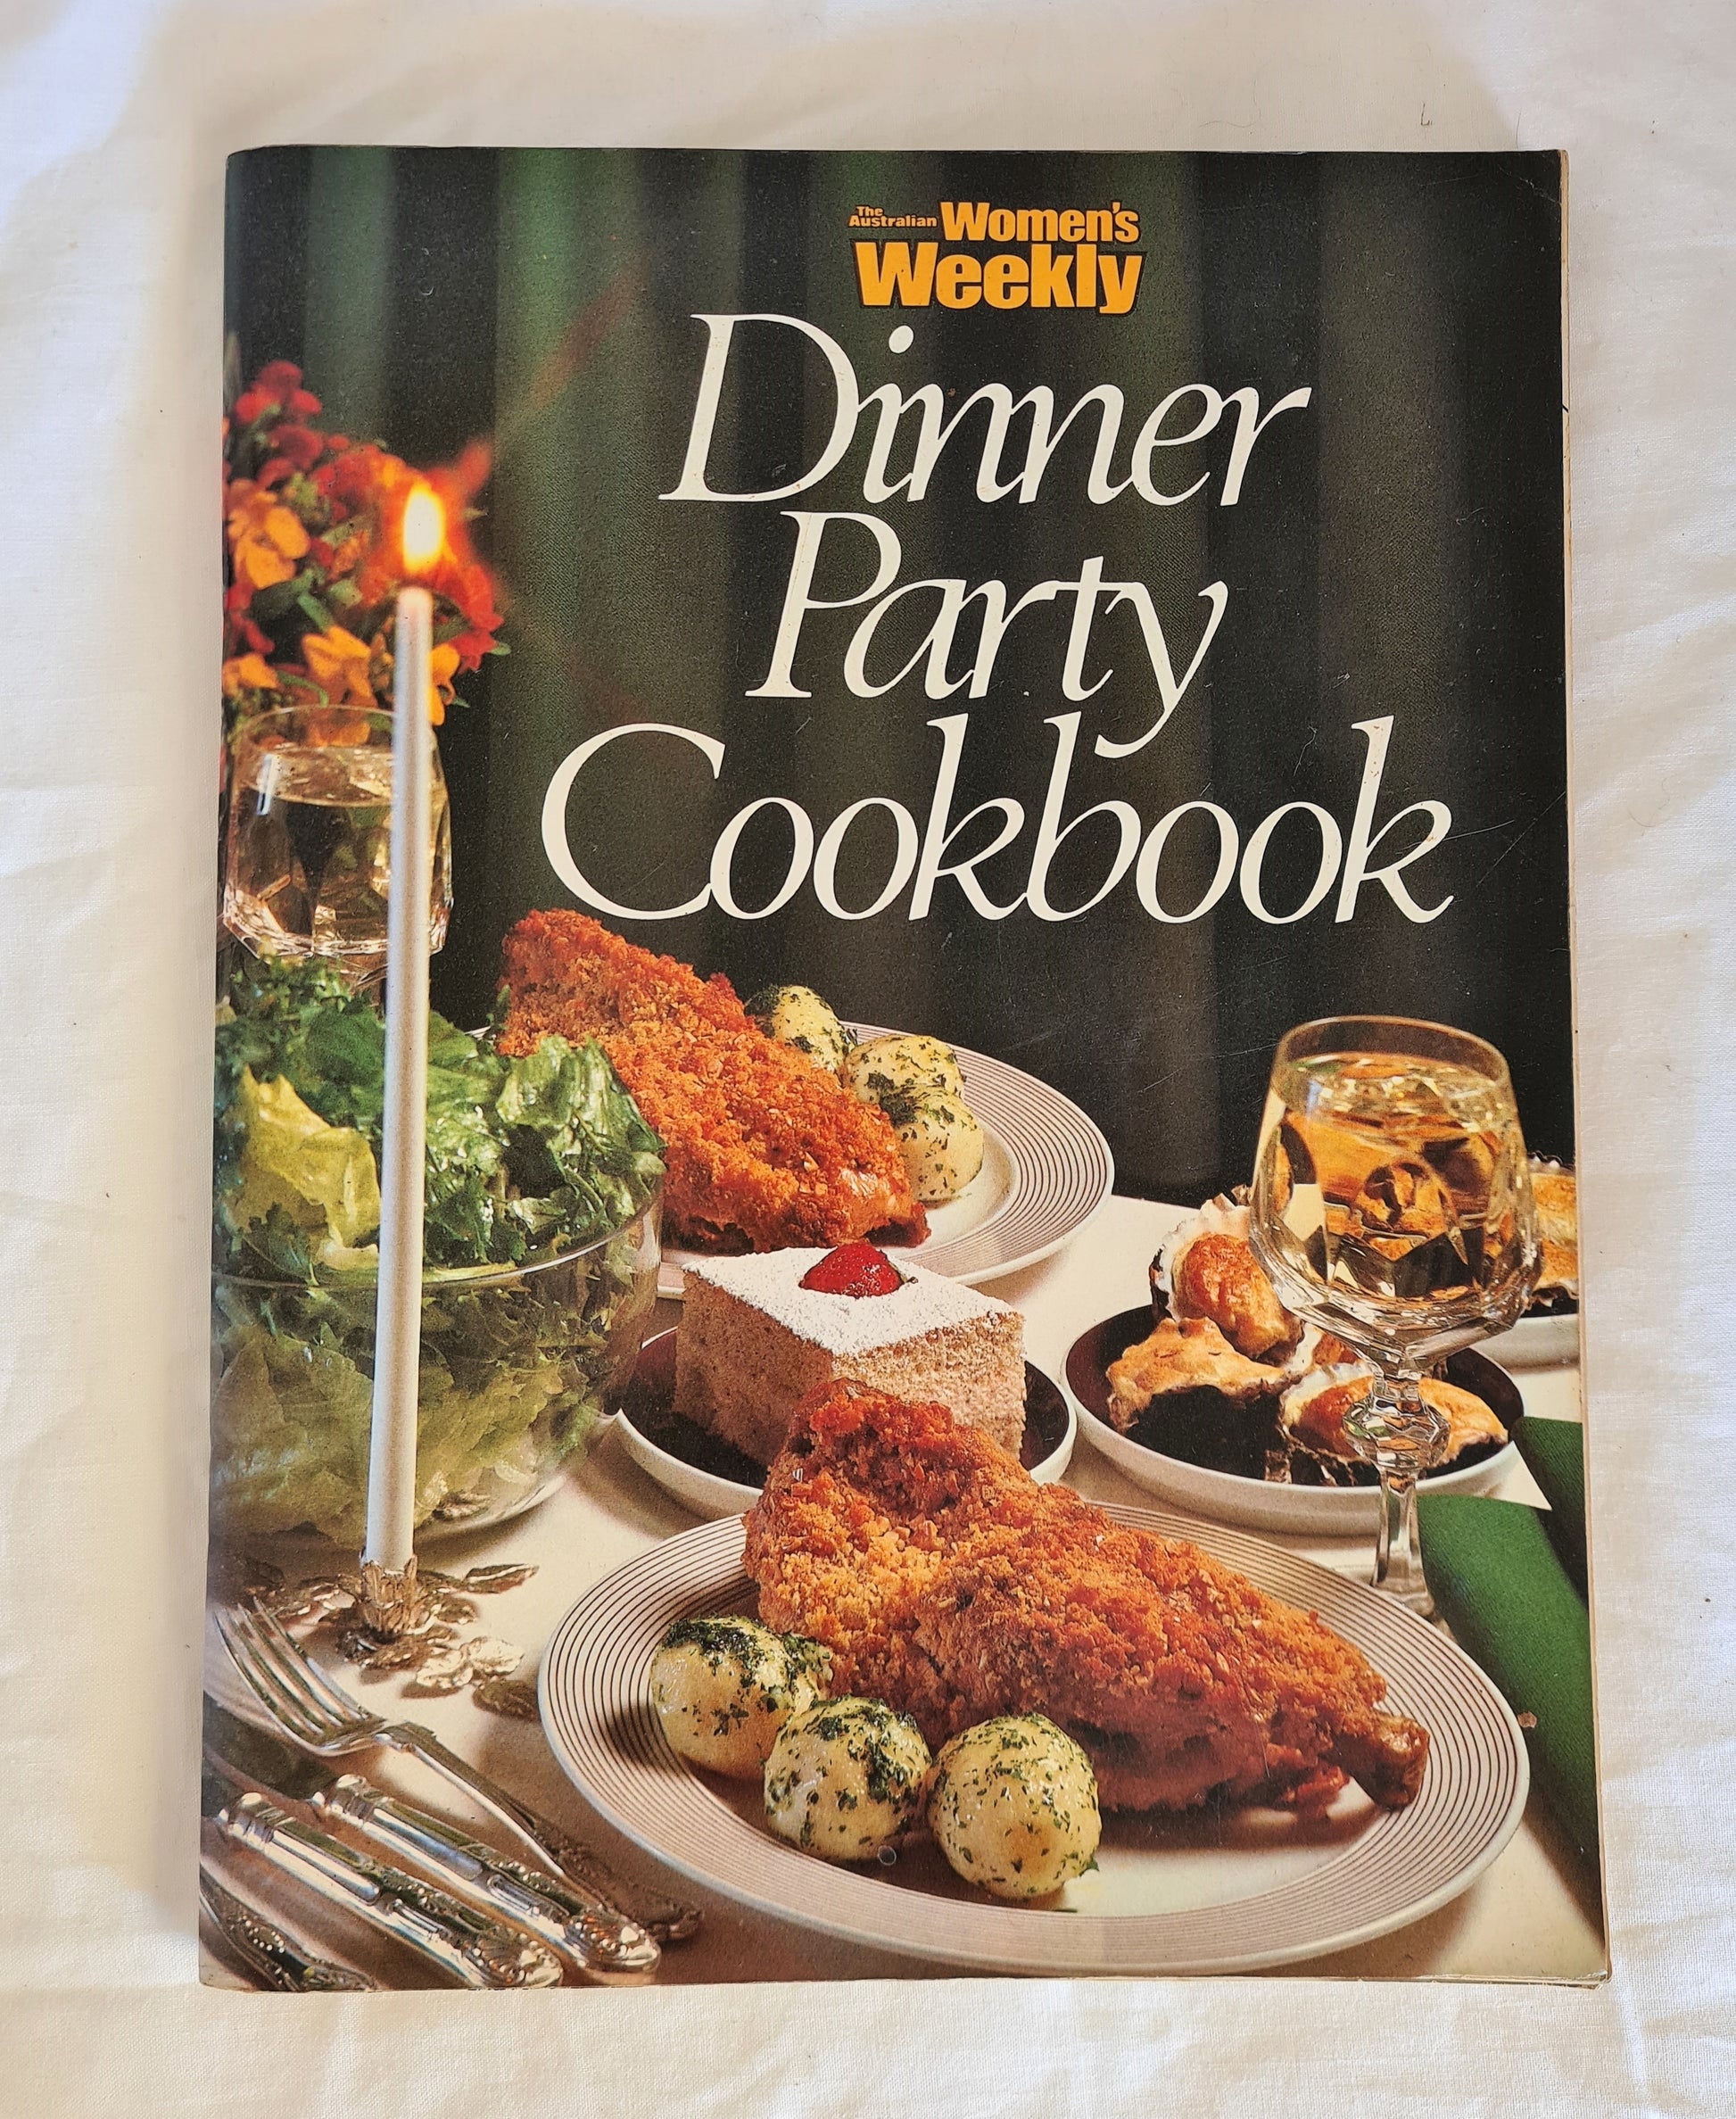 Dinner Party Cookbook  The Australian Women’s Weekly  Edited by Trevor Kennedy